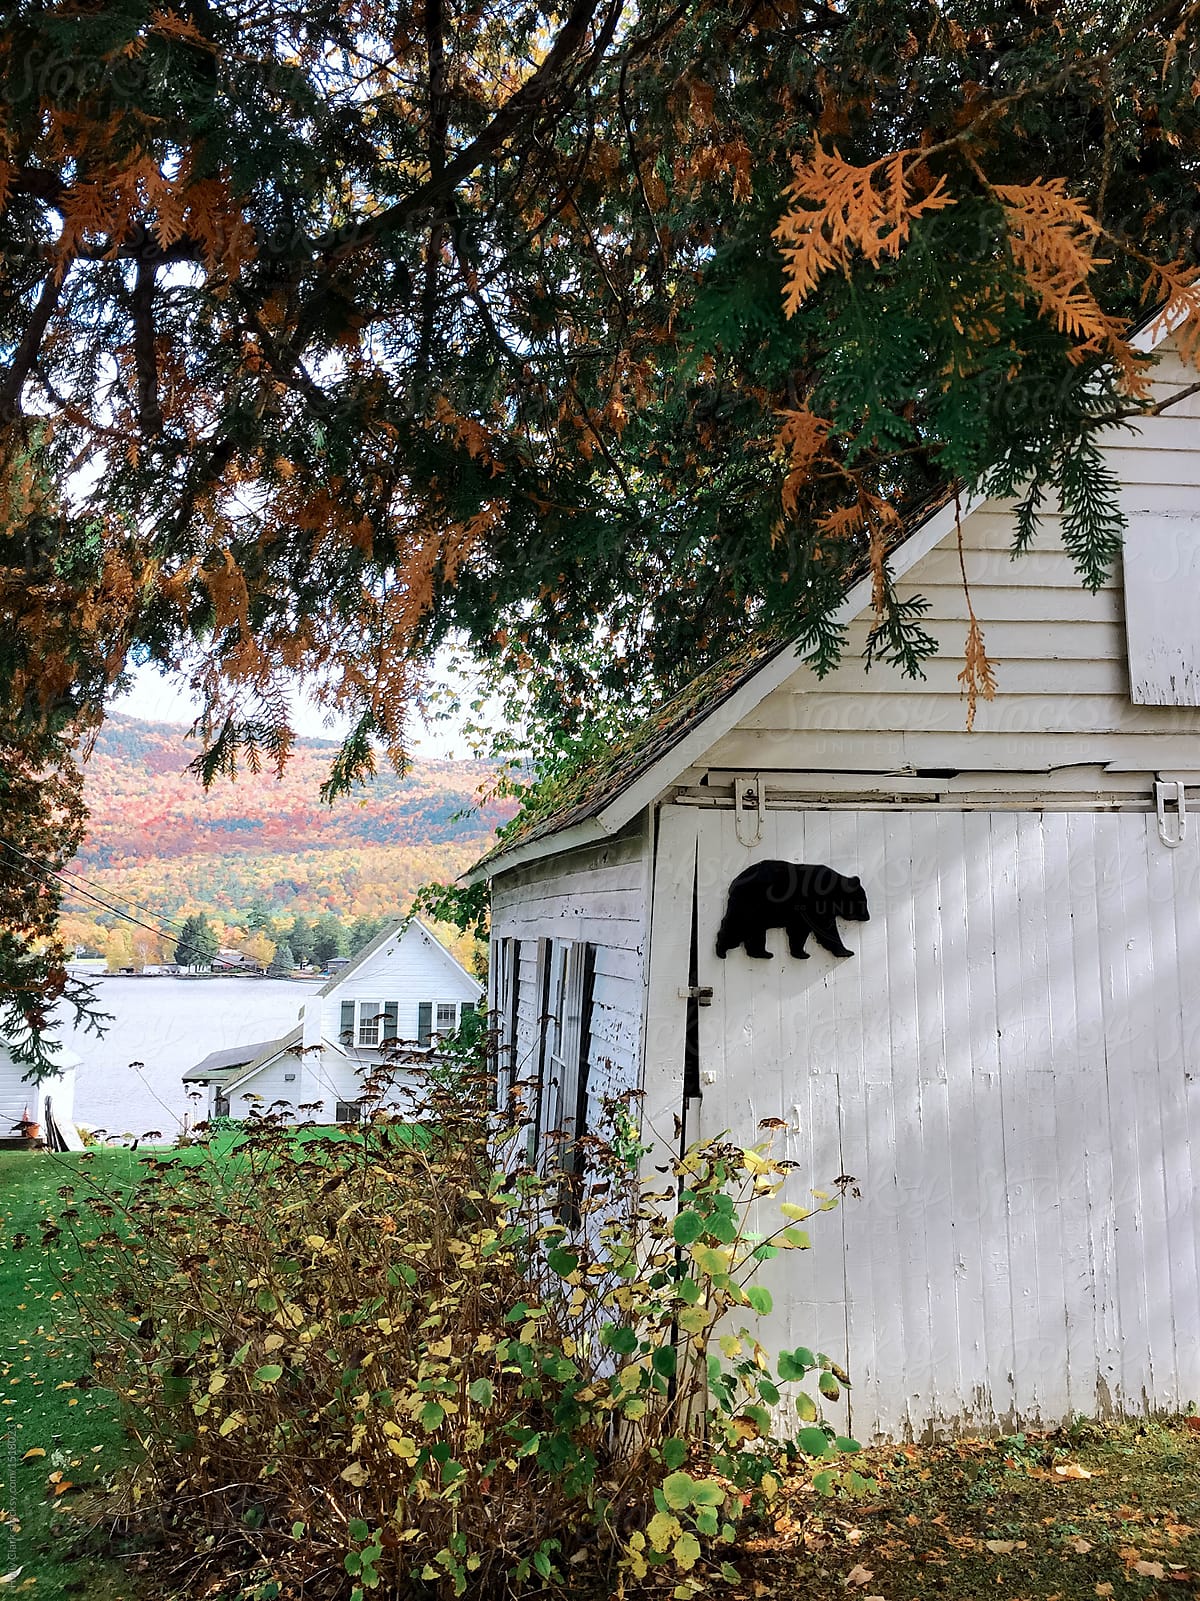 An Old Barn With A Bear Decoration On Its Door In Autumn By Holly Clark